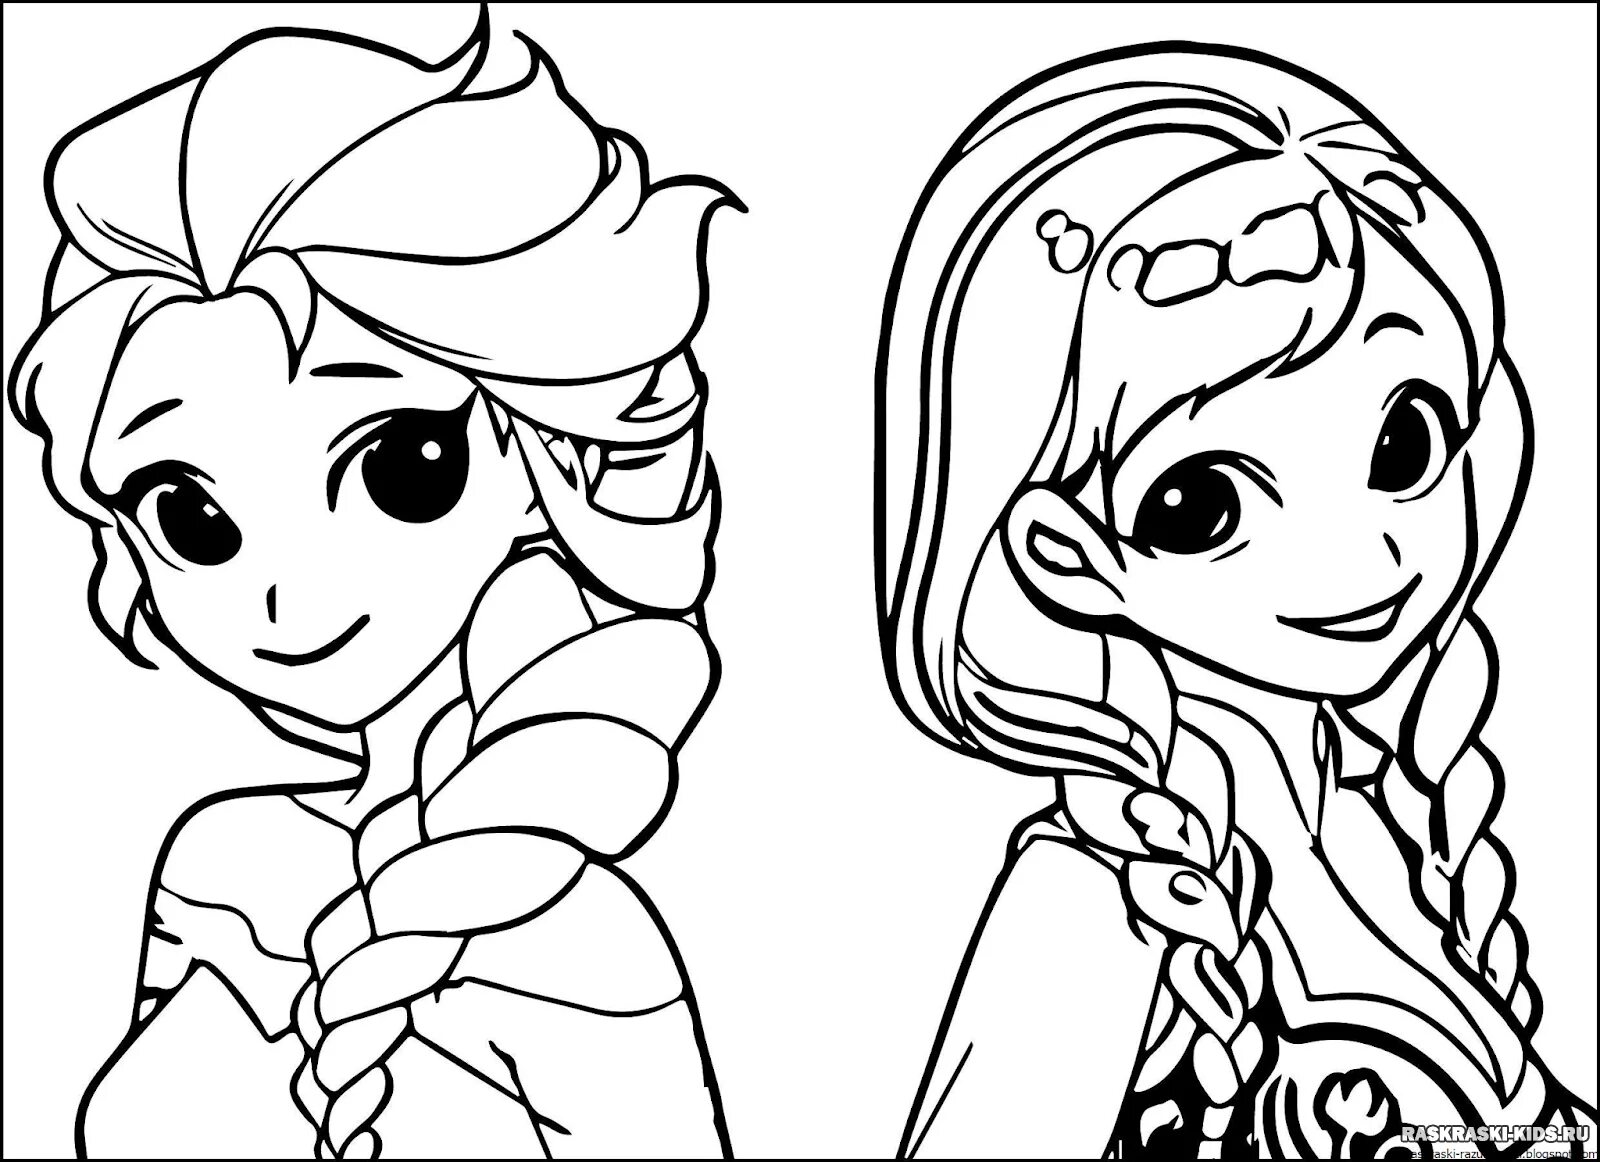 Mystical coloring page 2 for girls